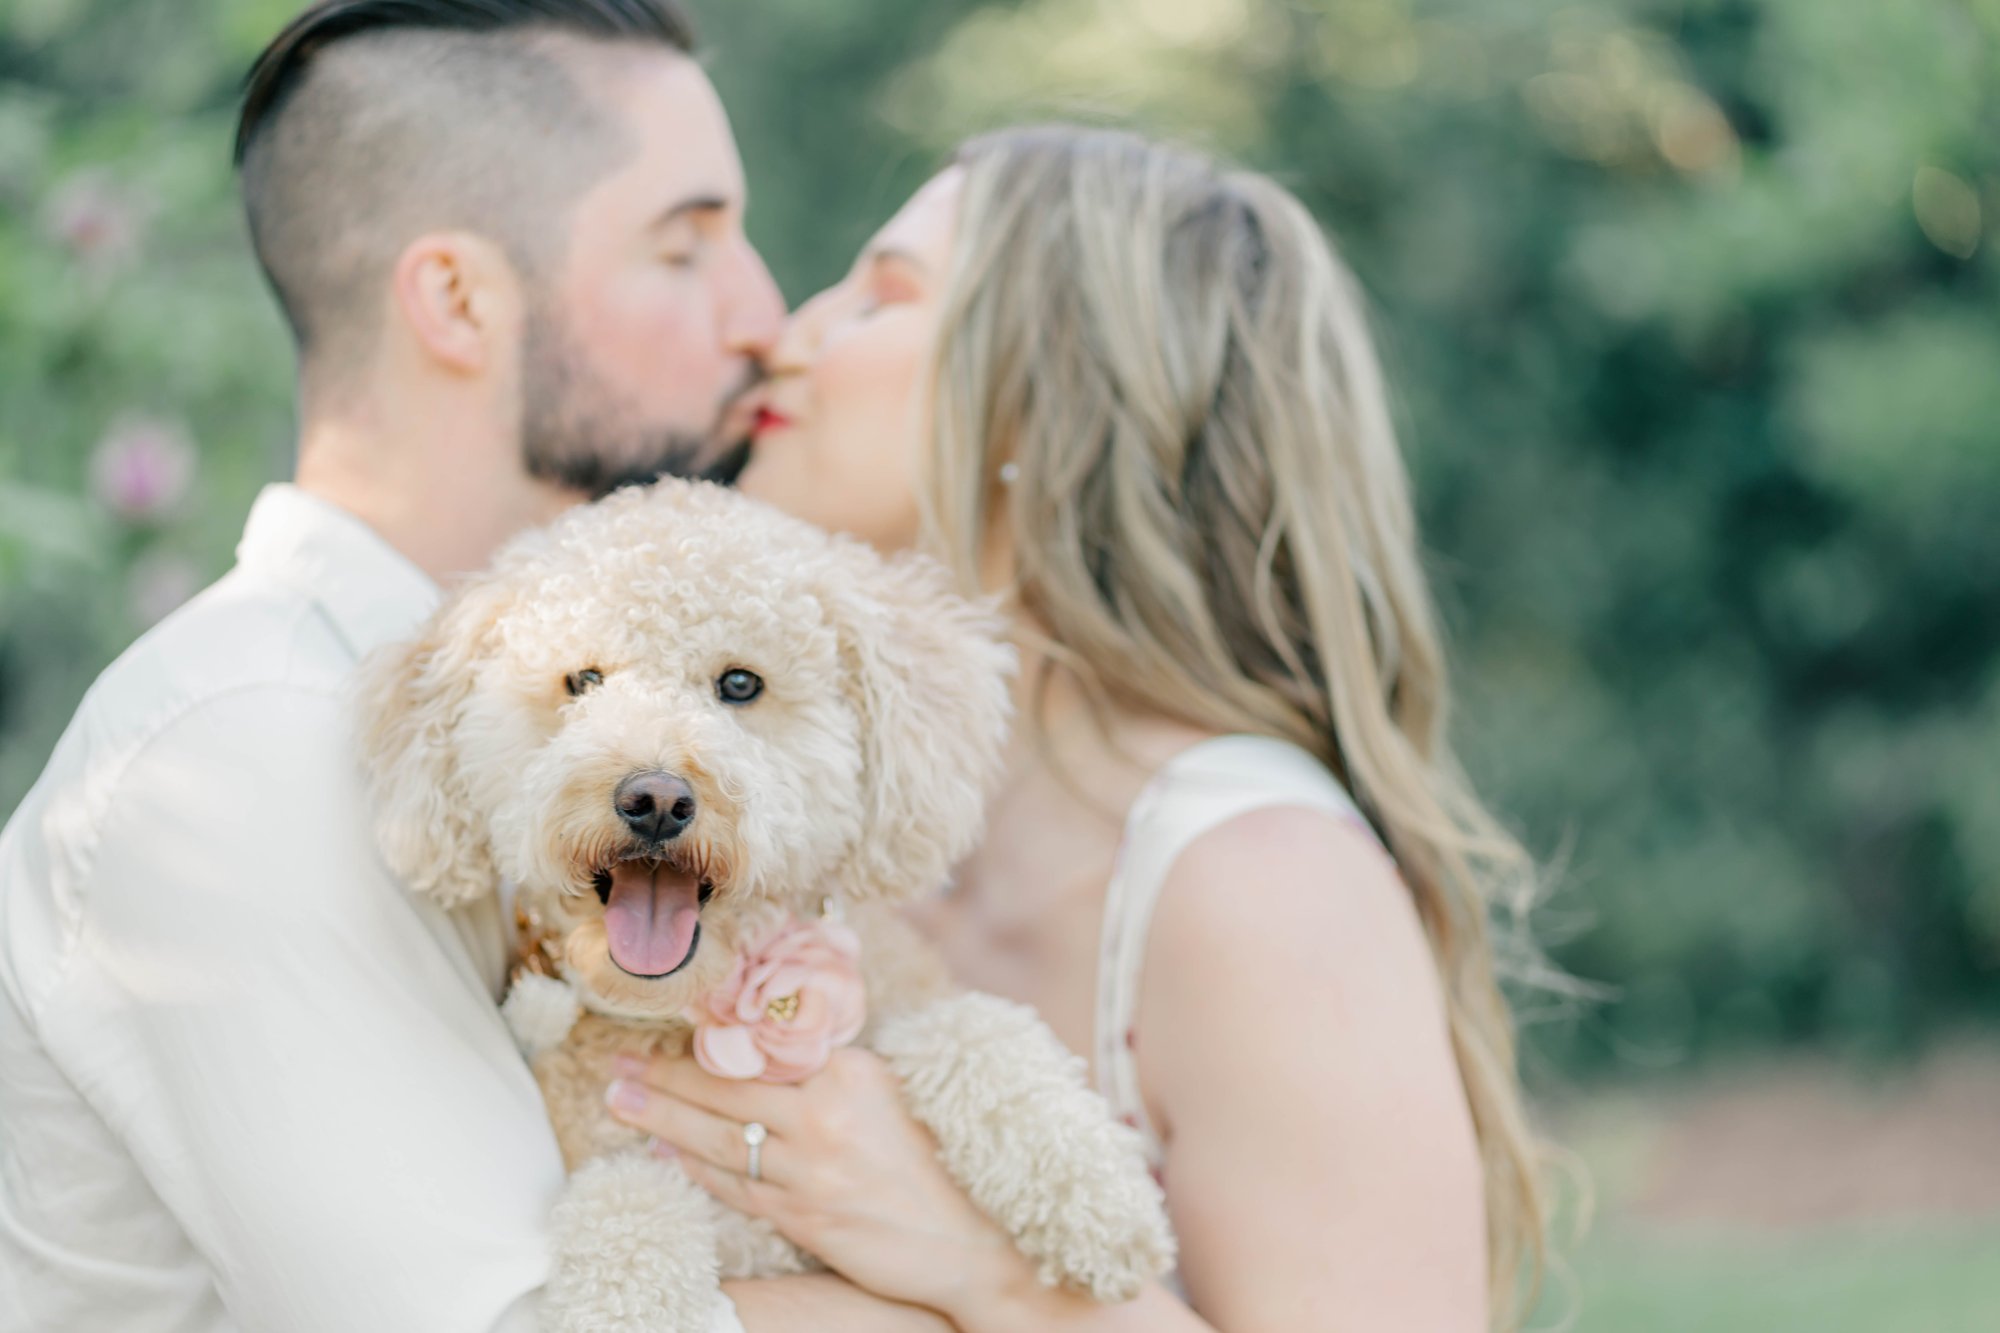 Engagment photo session of an engagemed couple with their dog at the National Arboretum captured by Stephanie Grooms Artistry